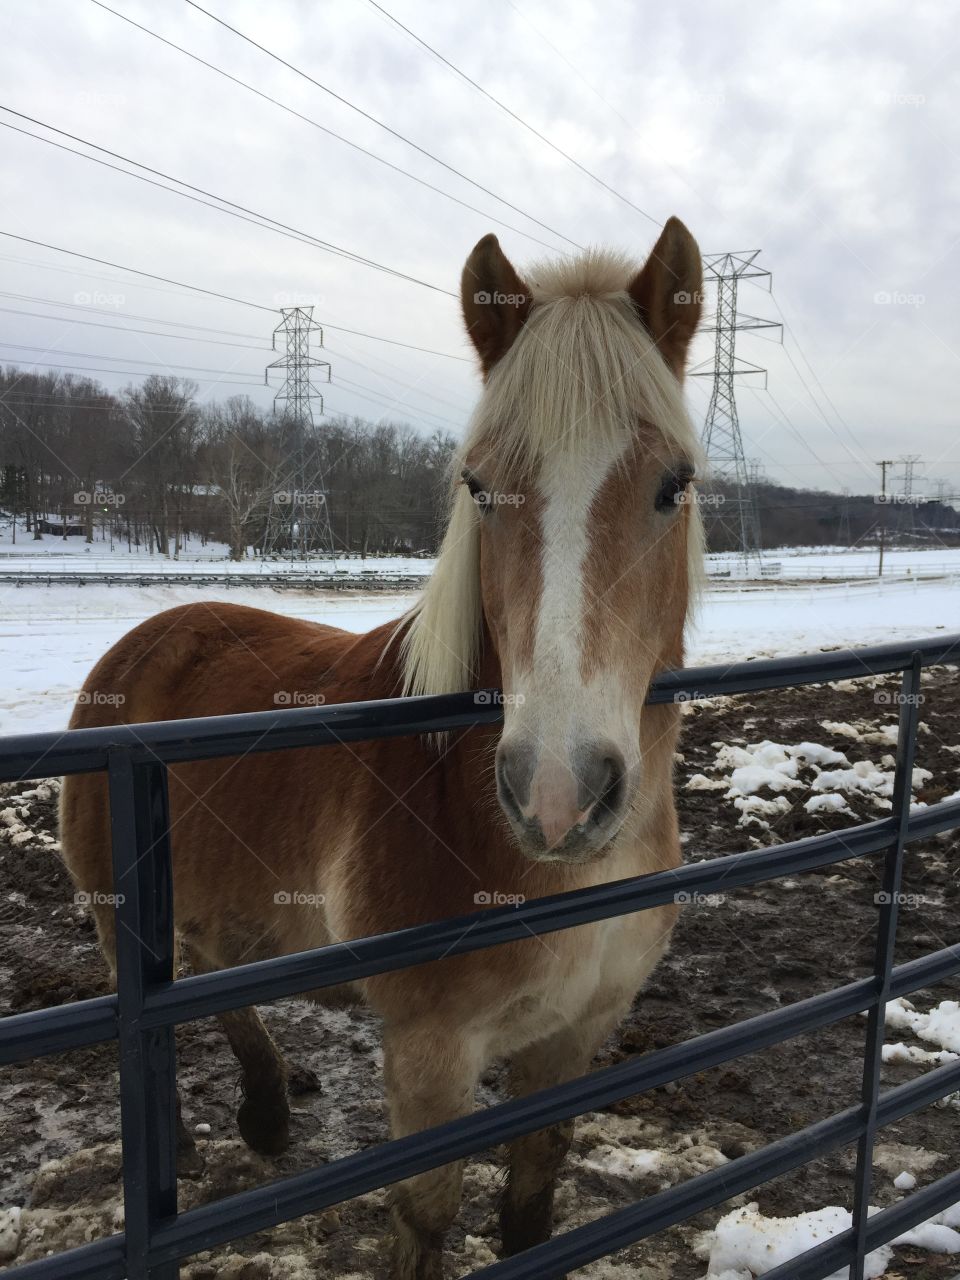 Adorable haflinger in the snow! 